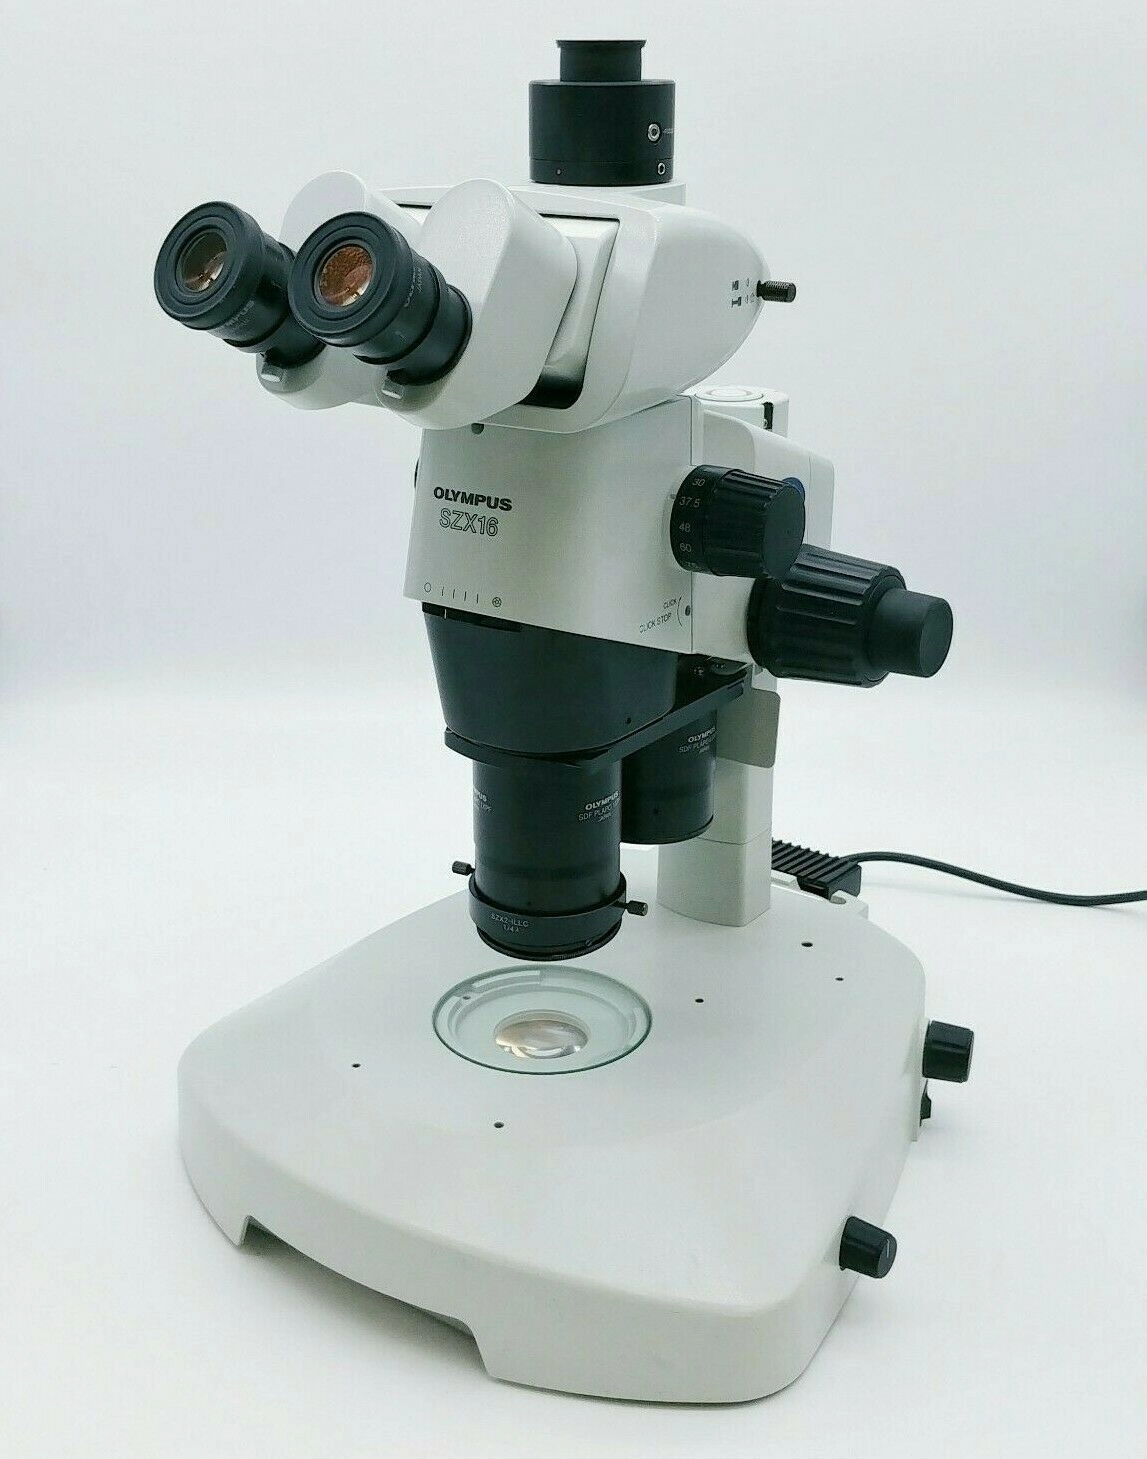 Olympus Microscope SZX16 with Dual Objective Turret and Tilting Trinocular Head